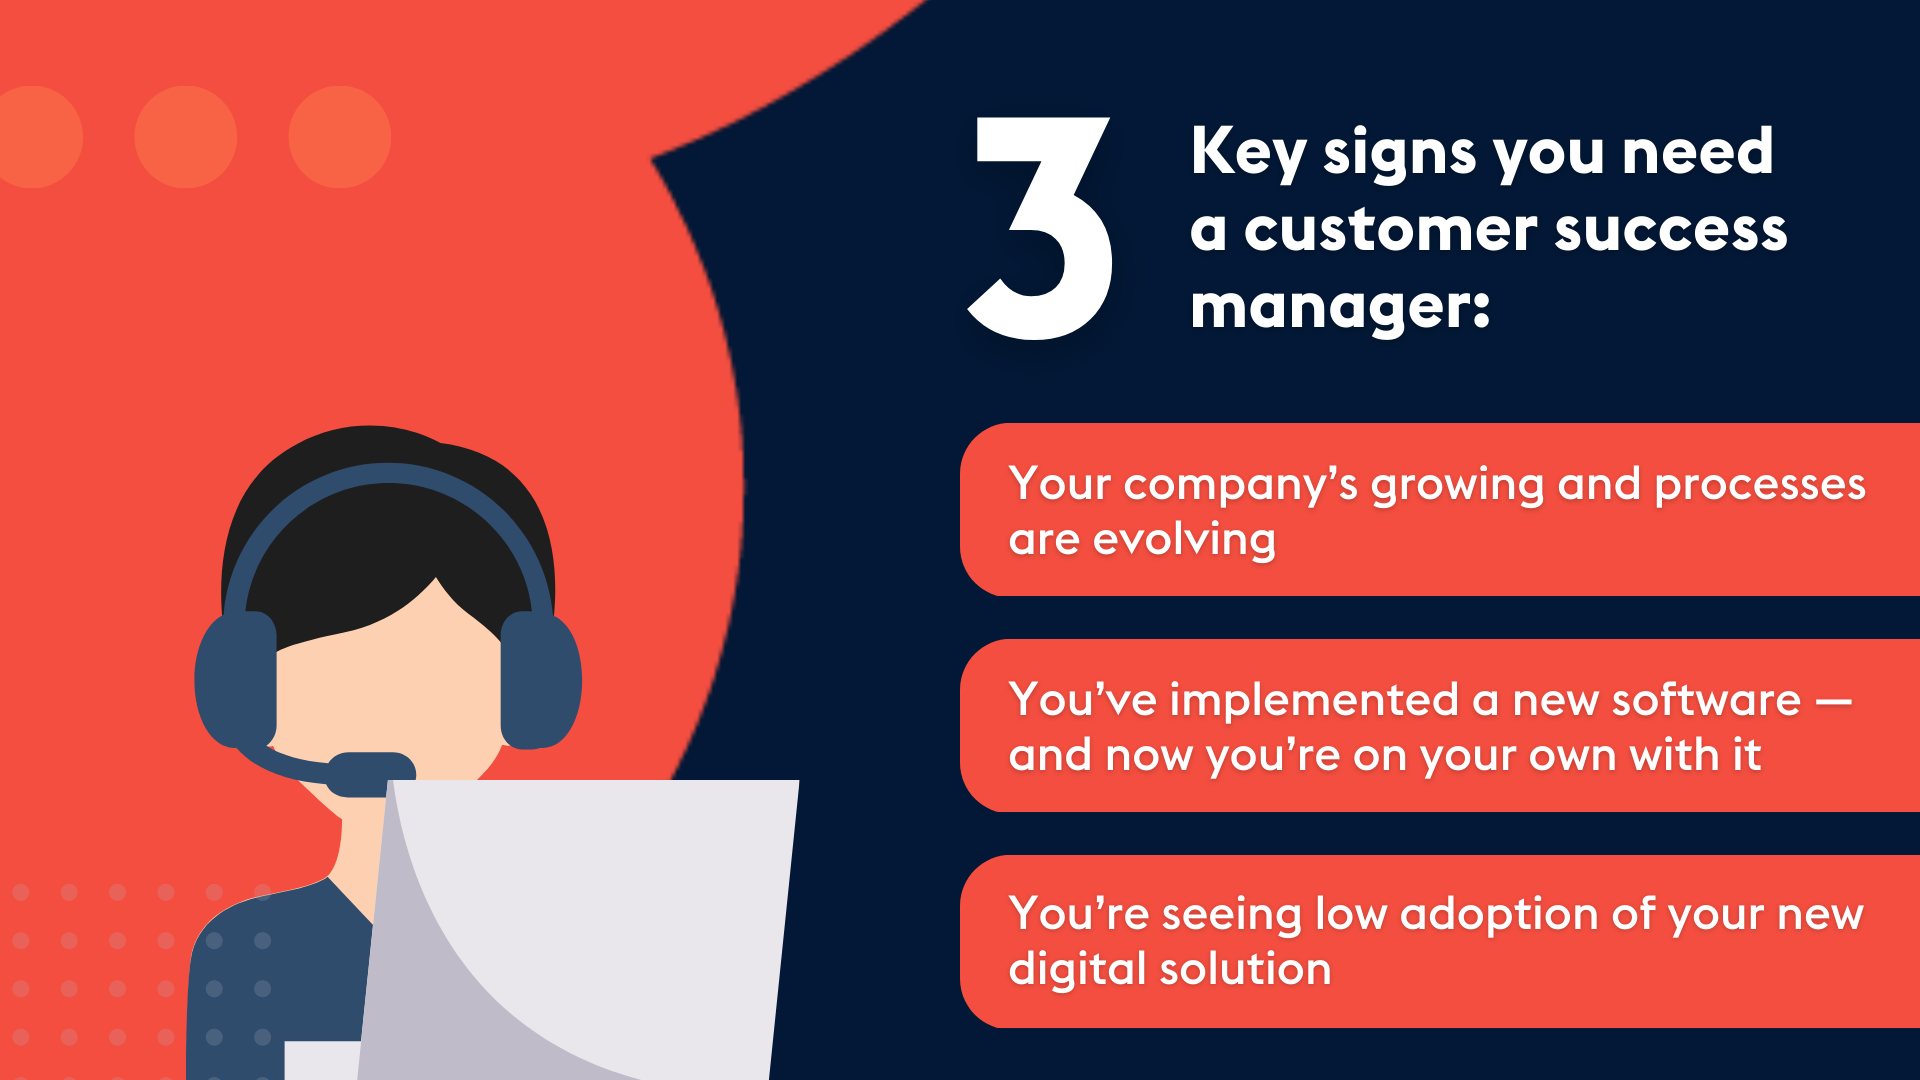 ProvidentCRM-CRM-3-Key-Signs-You-Need-Customer-Sucess-Manager